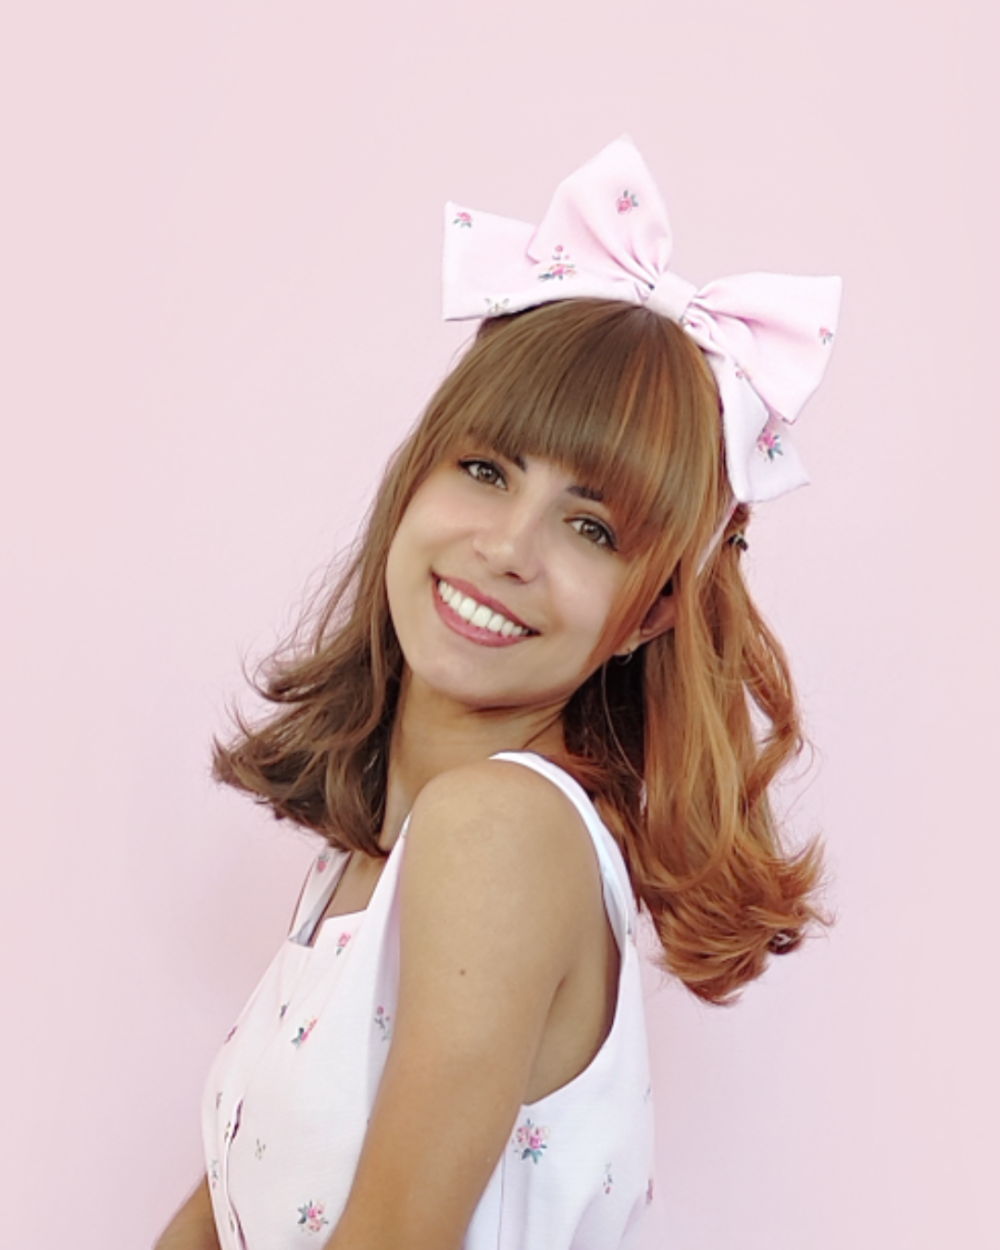 Pink headbow accessory printed with flowers by melikestea